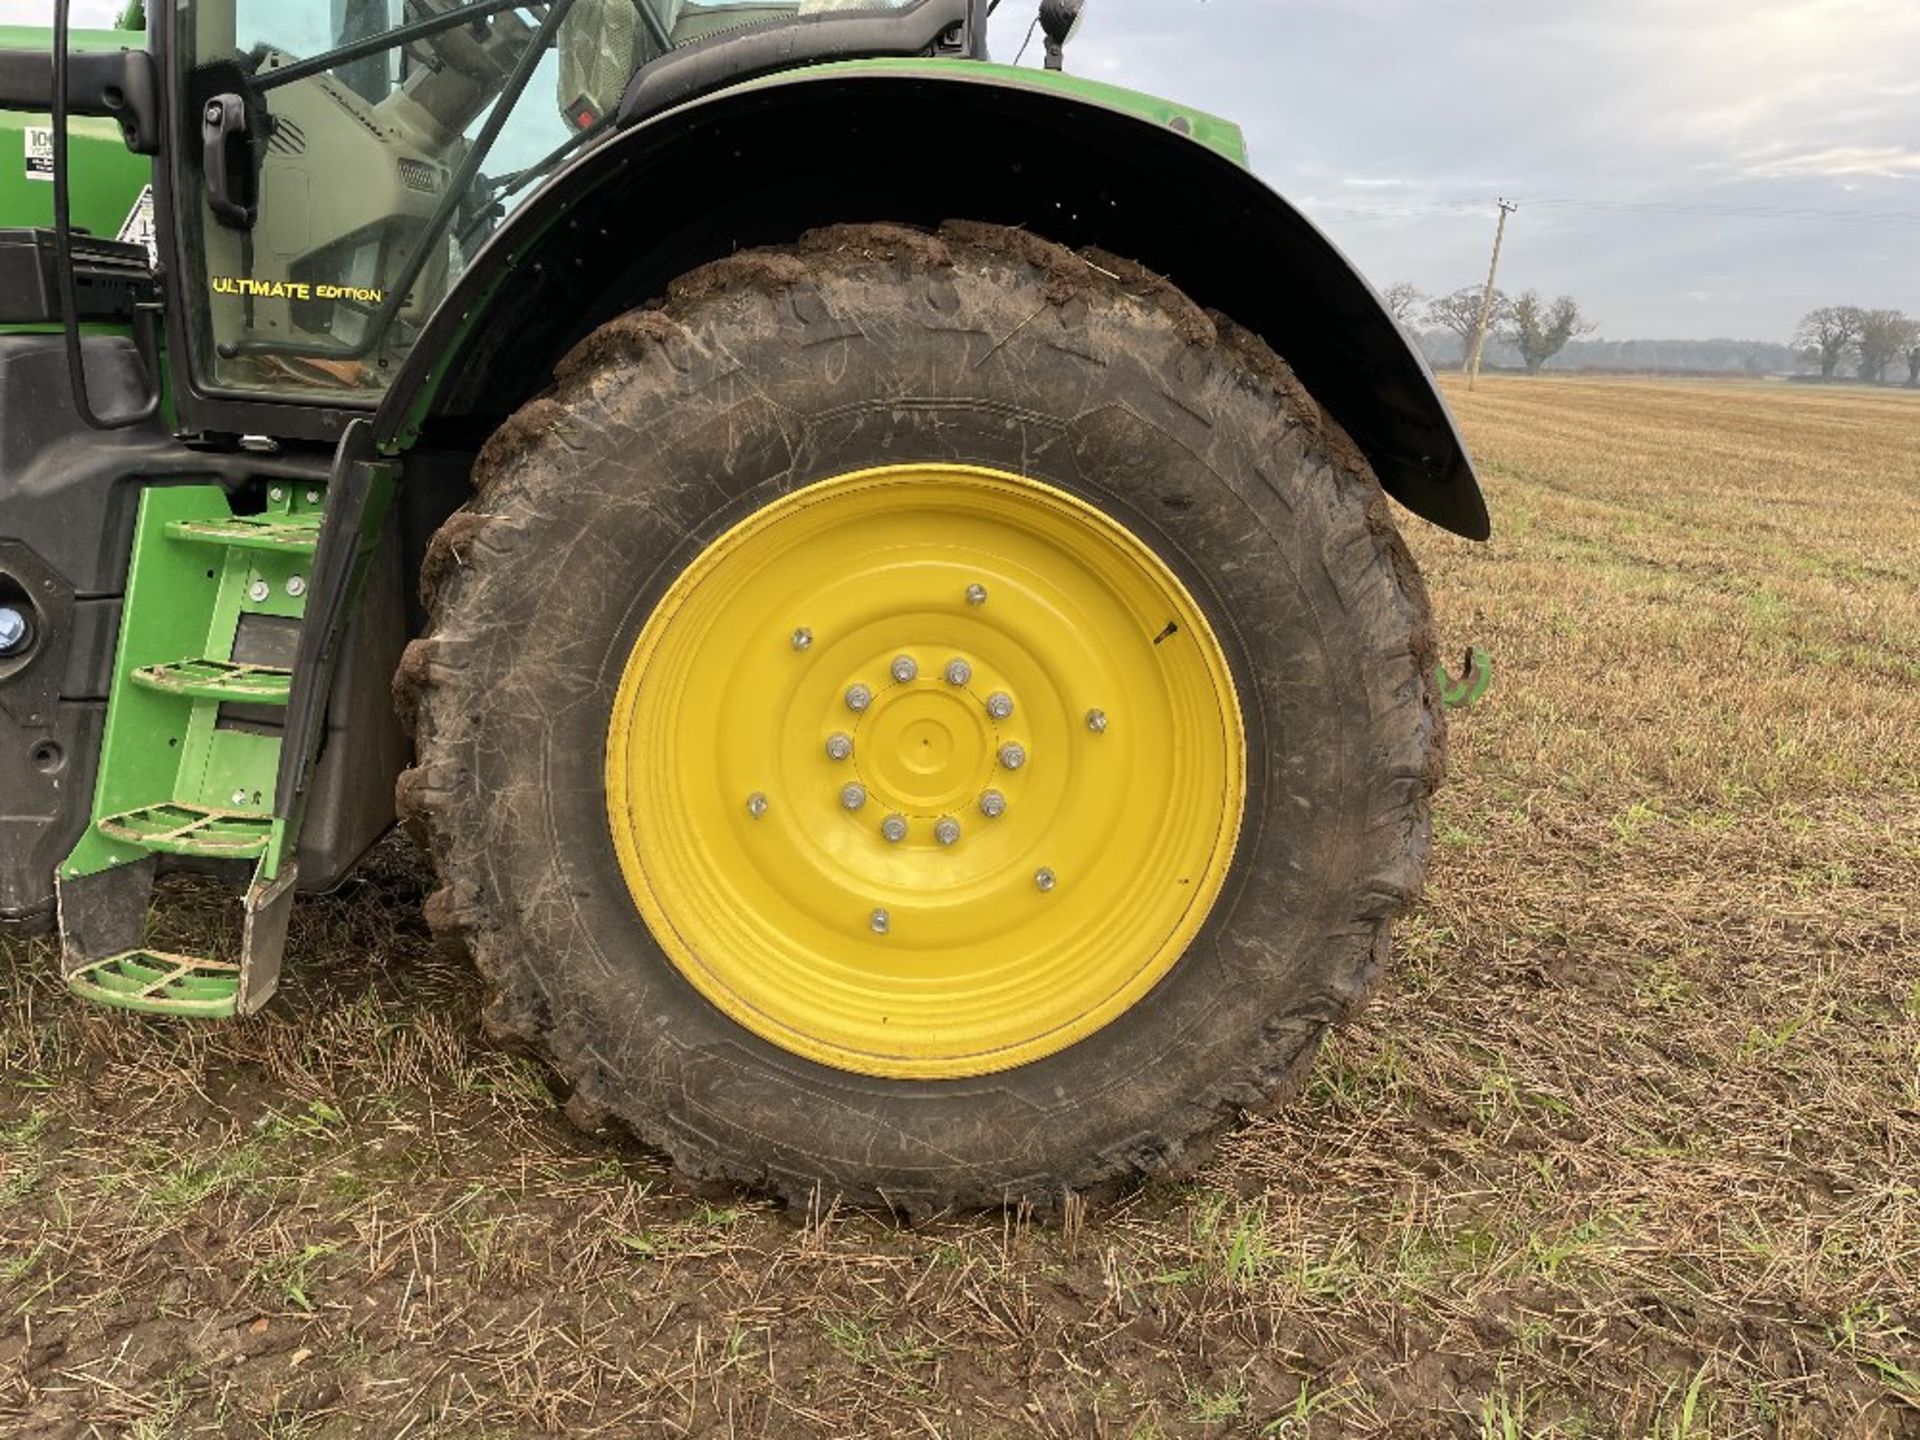 2018 John Deere 6195R 4wd Tractor (Ultimate Edition), approx. 1848 hours, Reg No. - Image 12 of 19